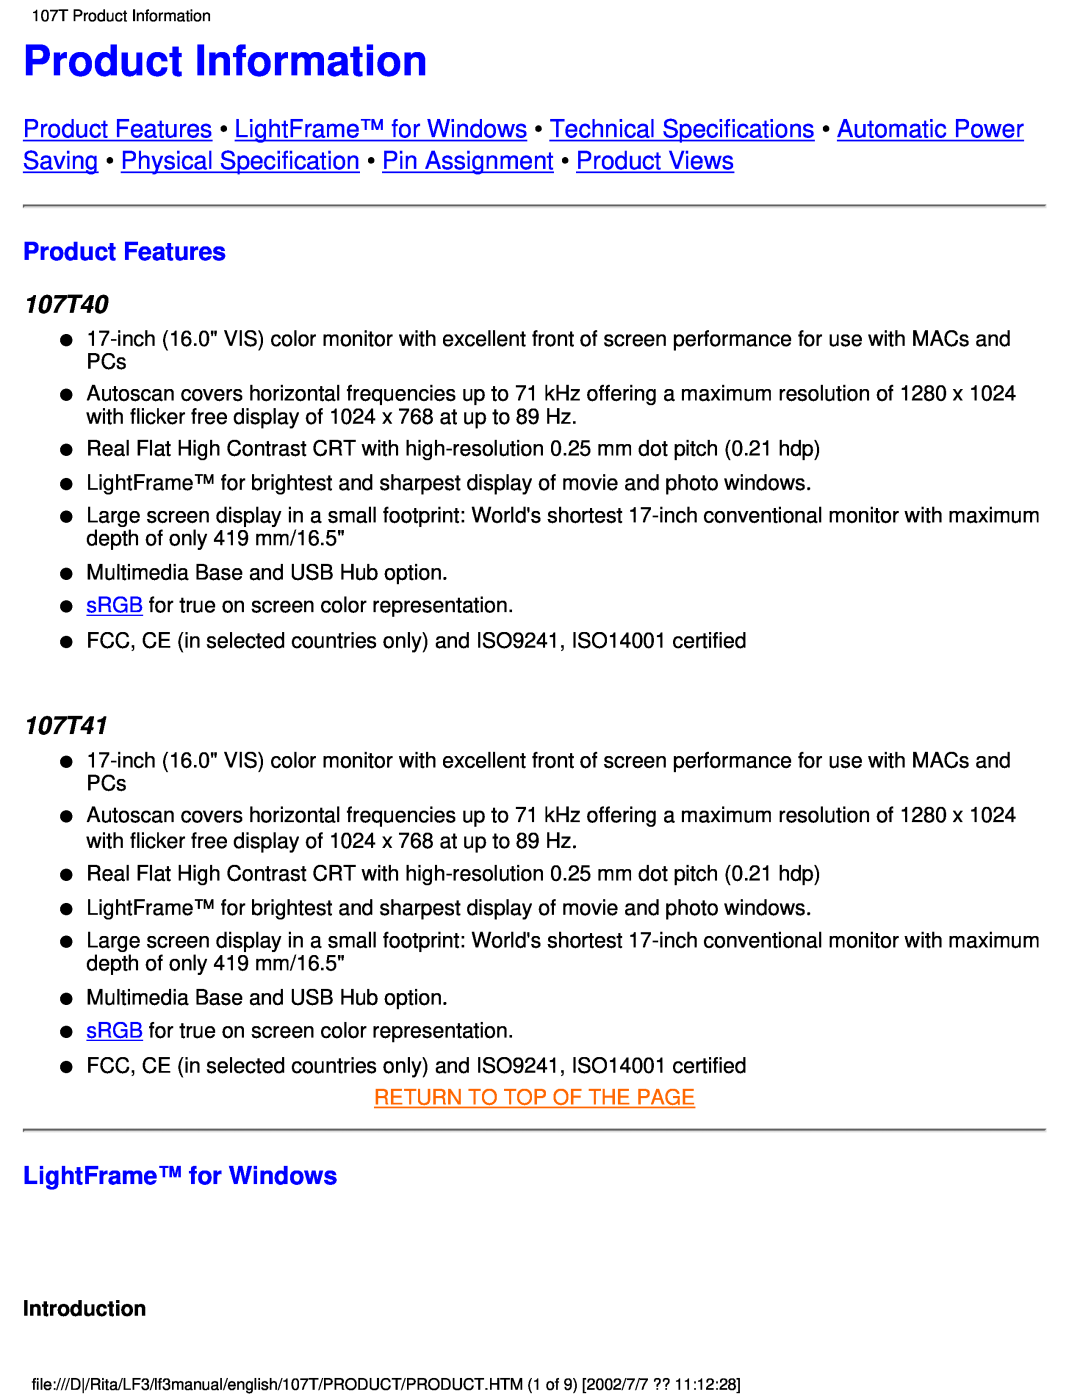 Philips 107T41 user manual Product Information, Product Features, 107T40, LightFrame for Windows, Return To Top Of The Page 